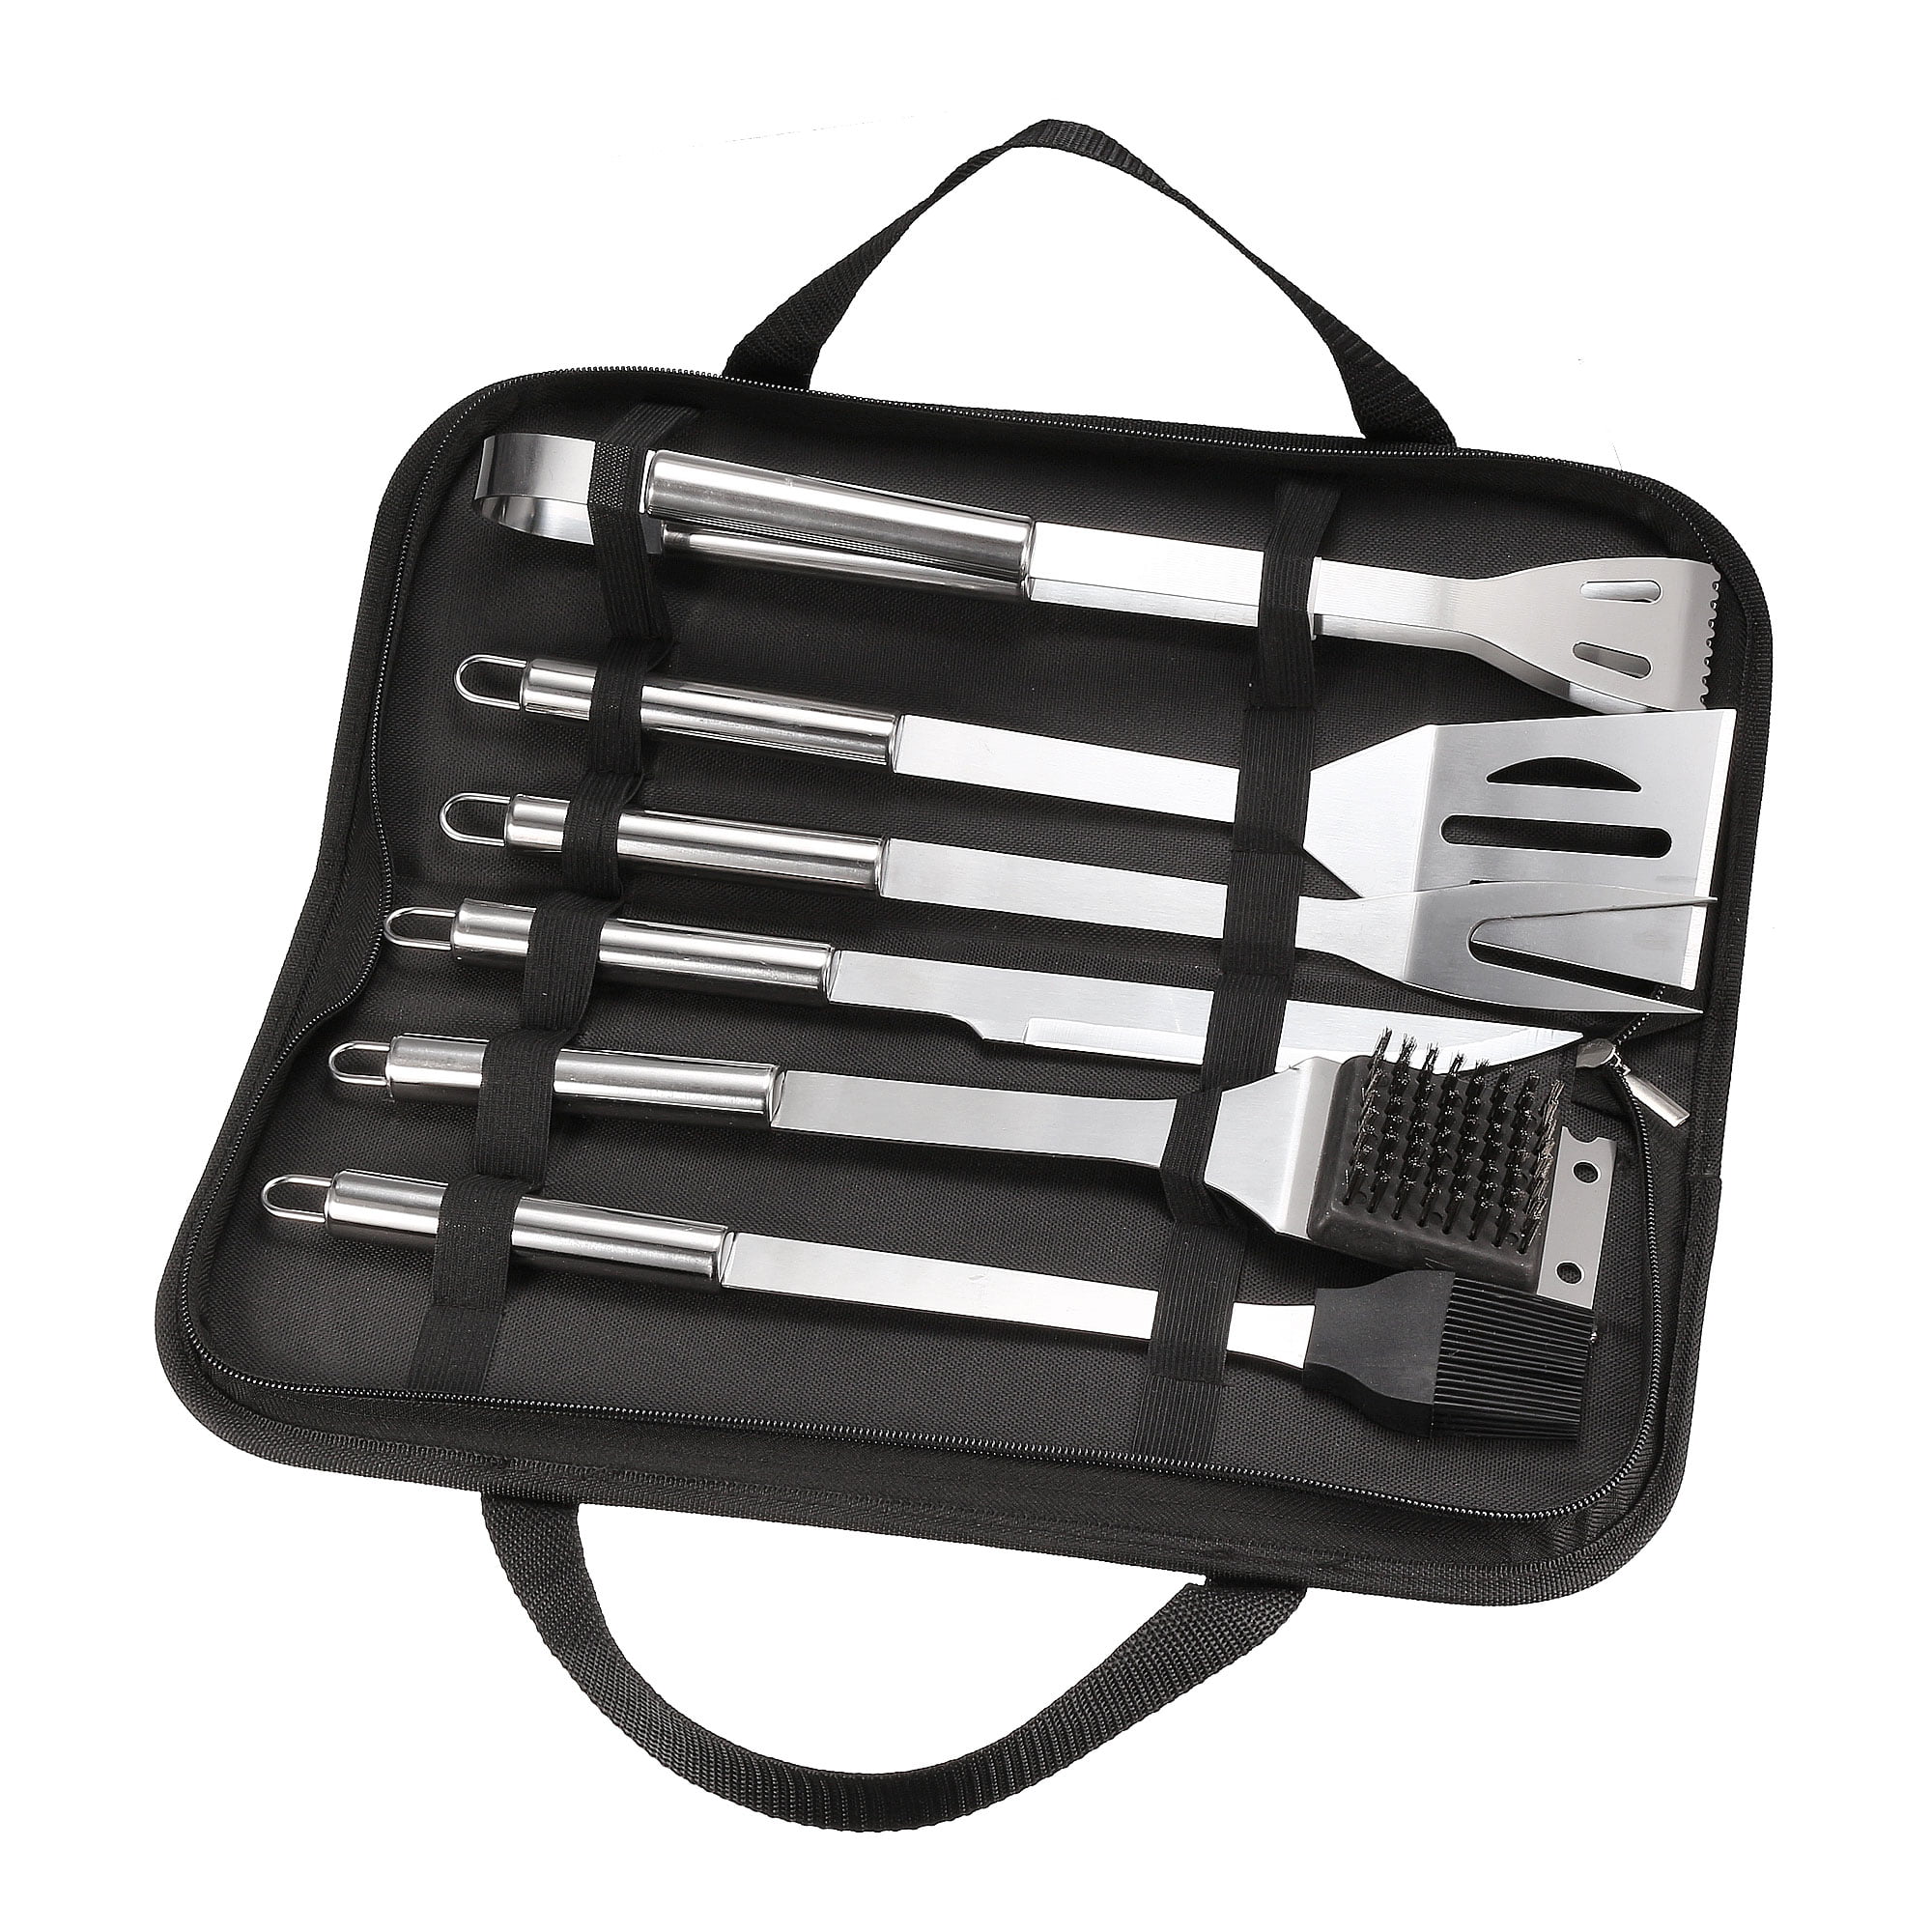 Uxcell BBQ Grill Tool Set- 6 in 1 Stainless Steel Grilling Accessories ...